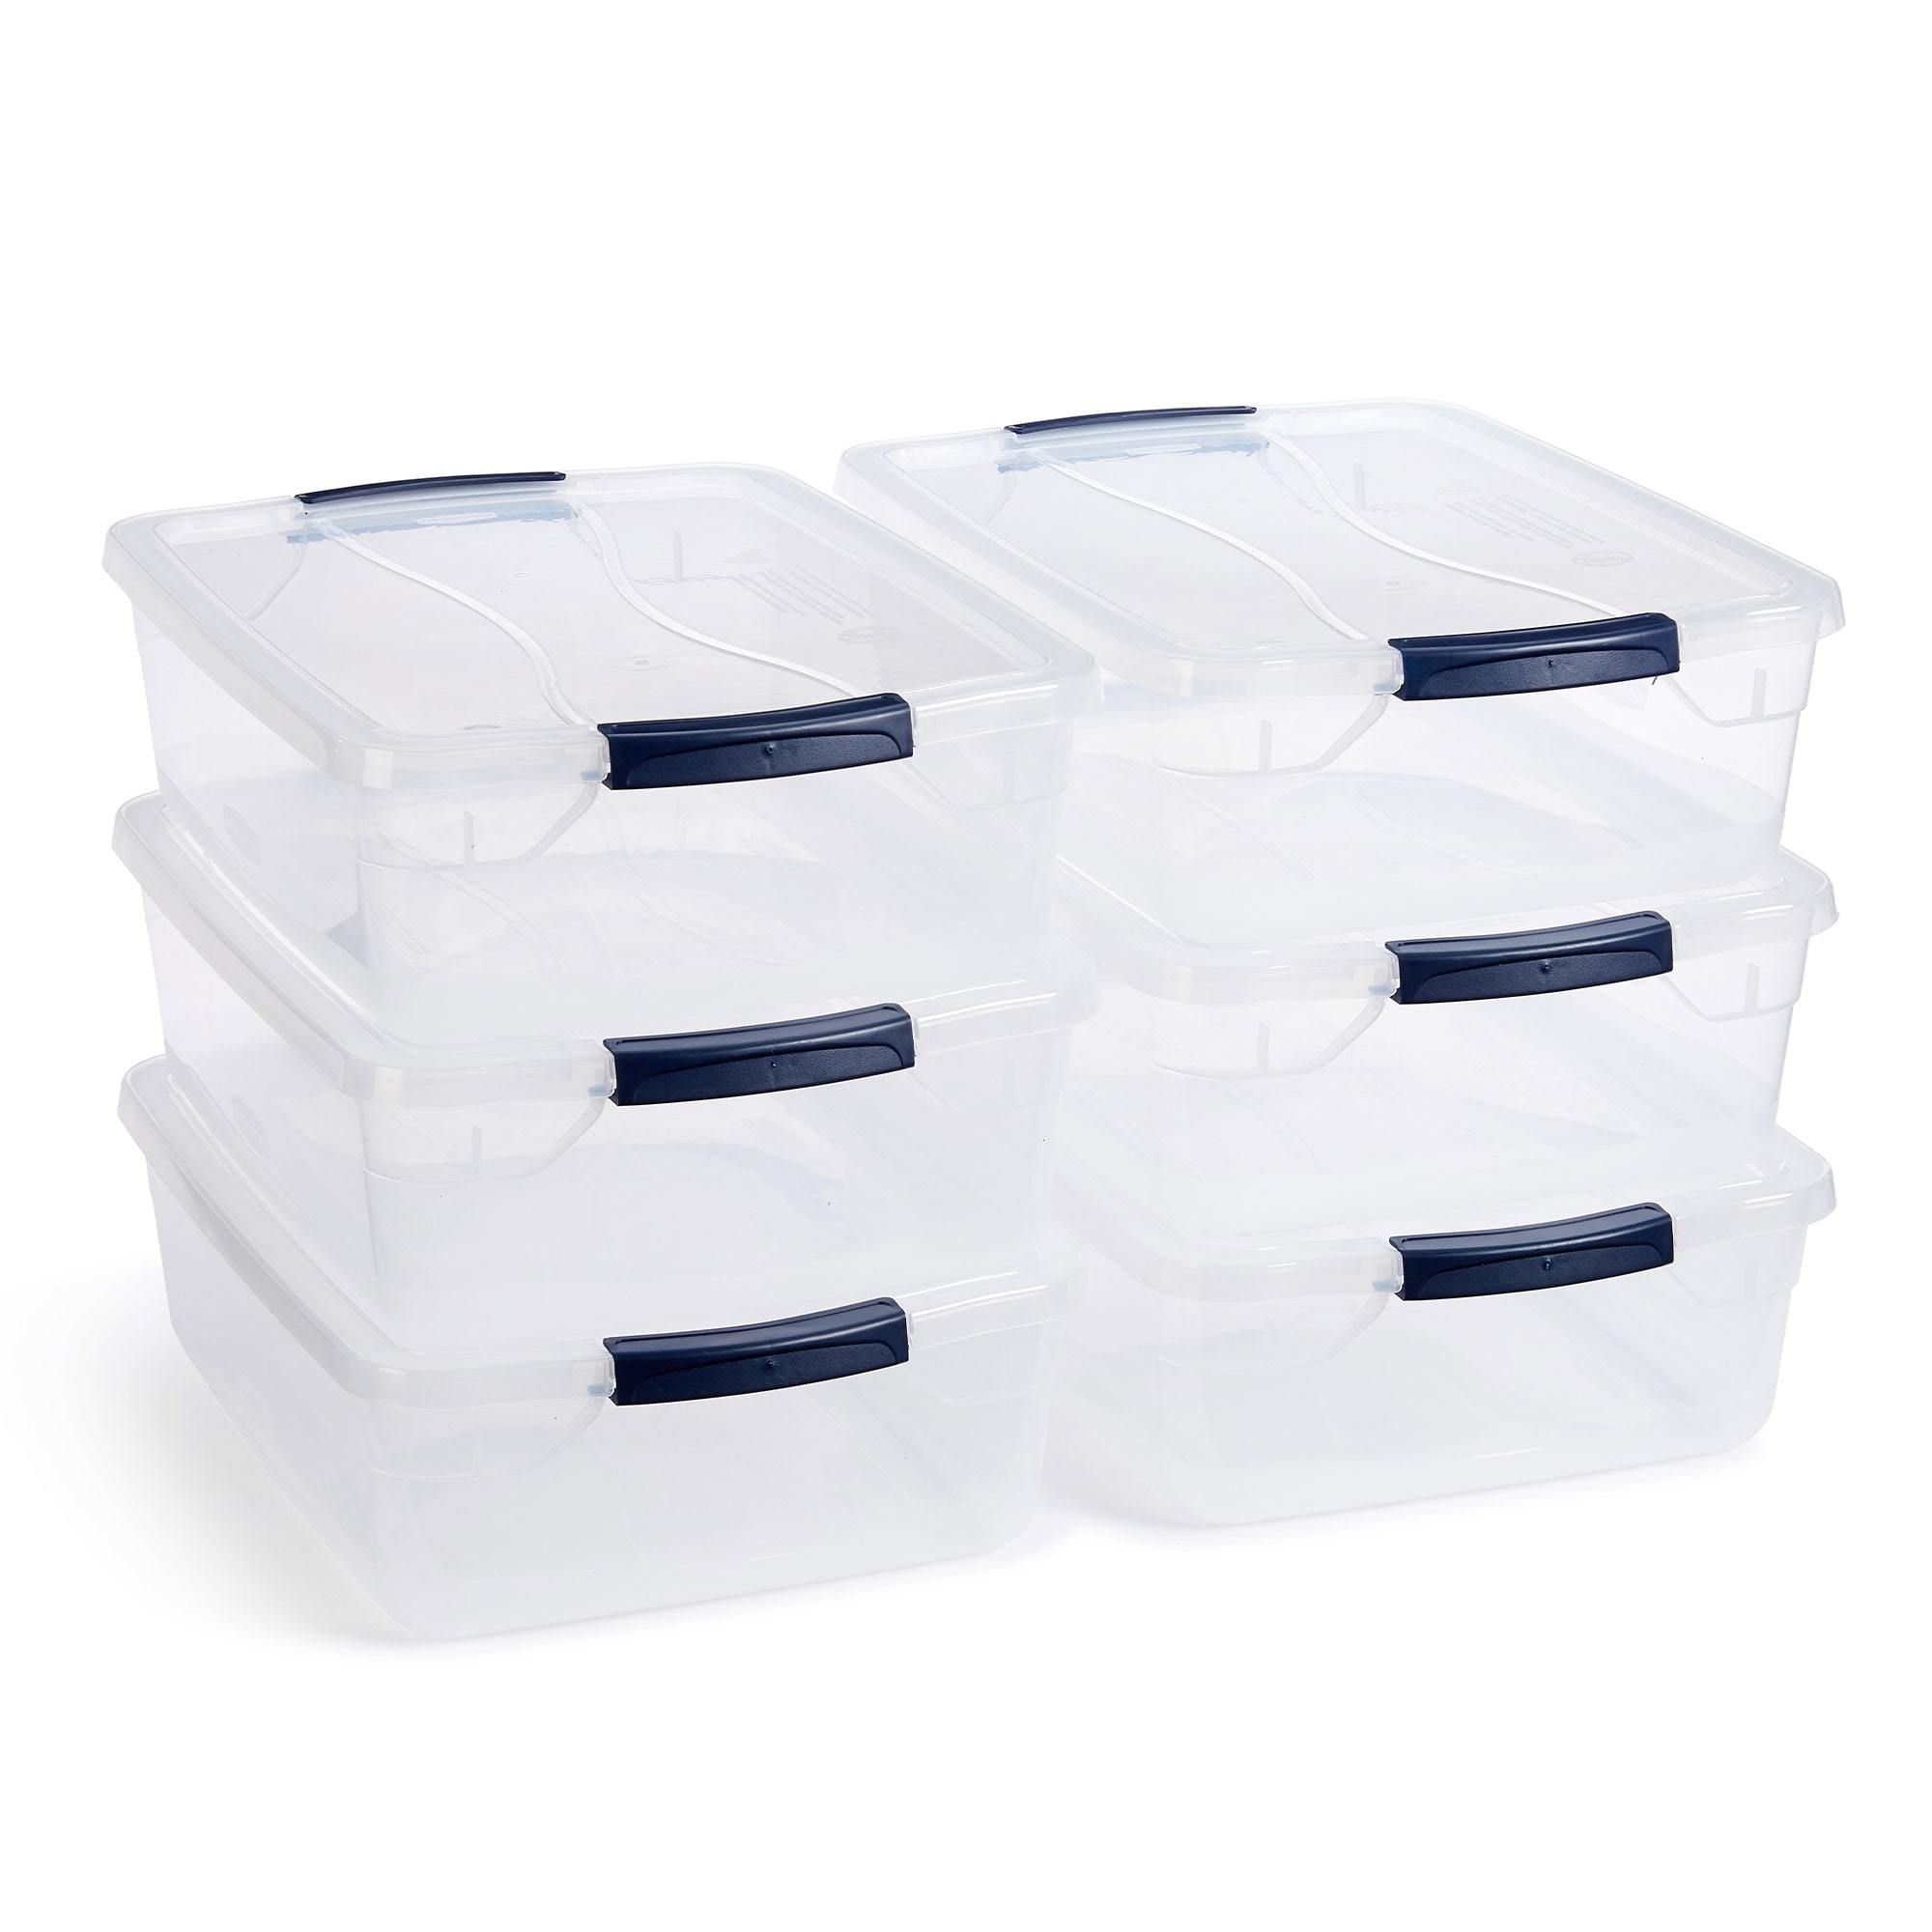 Rubbermaid Cleverstore 16 Qt. Plastic Storage Tote Container with Lid (6-Pack), Clear